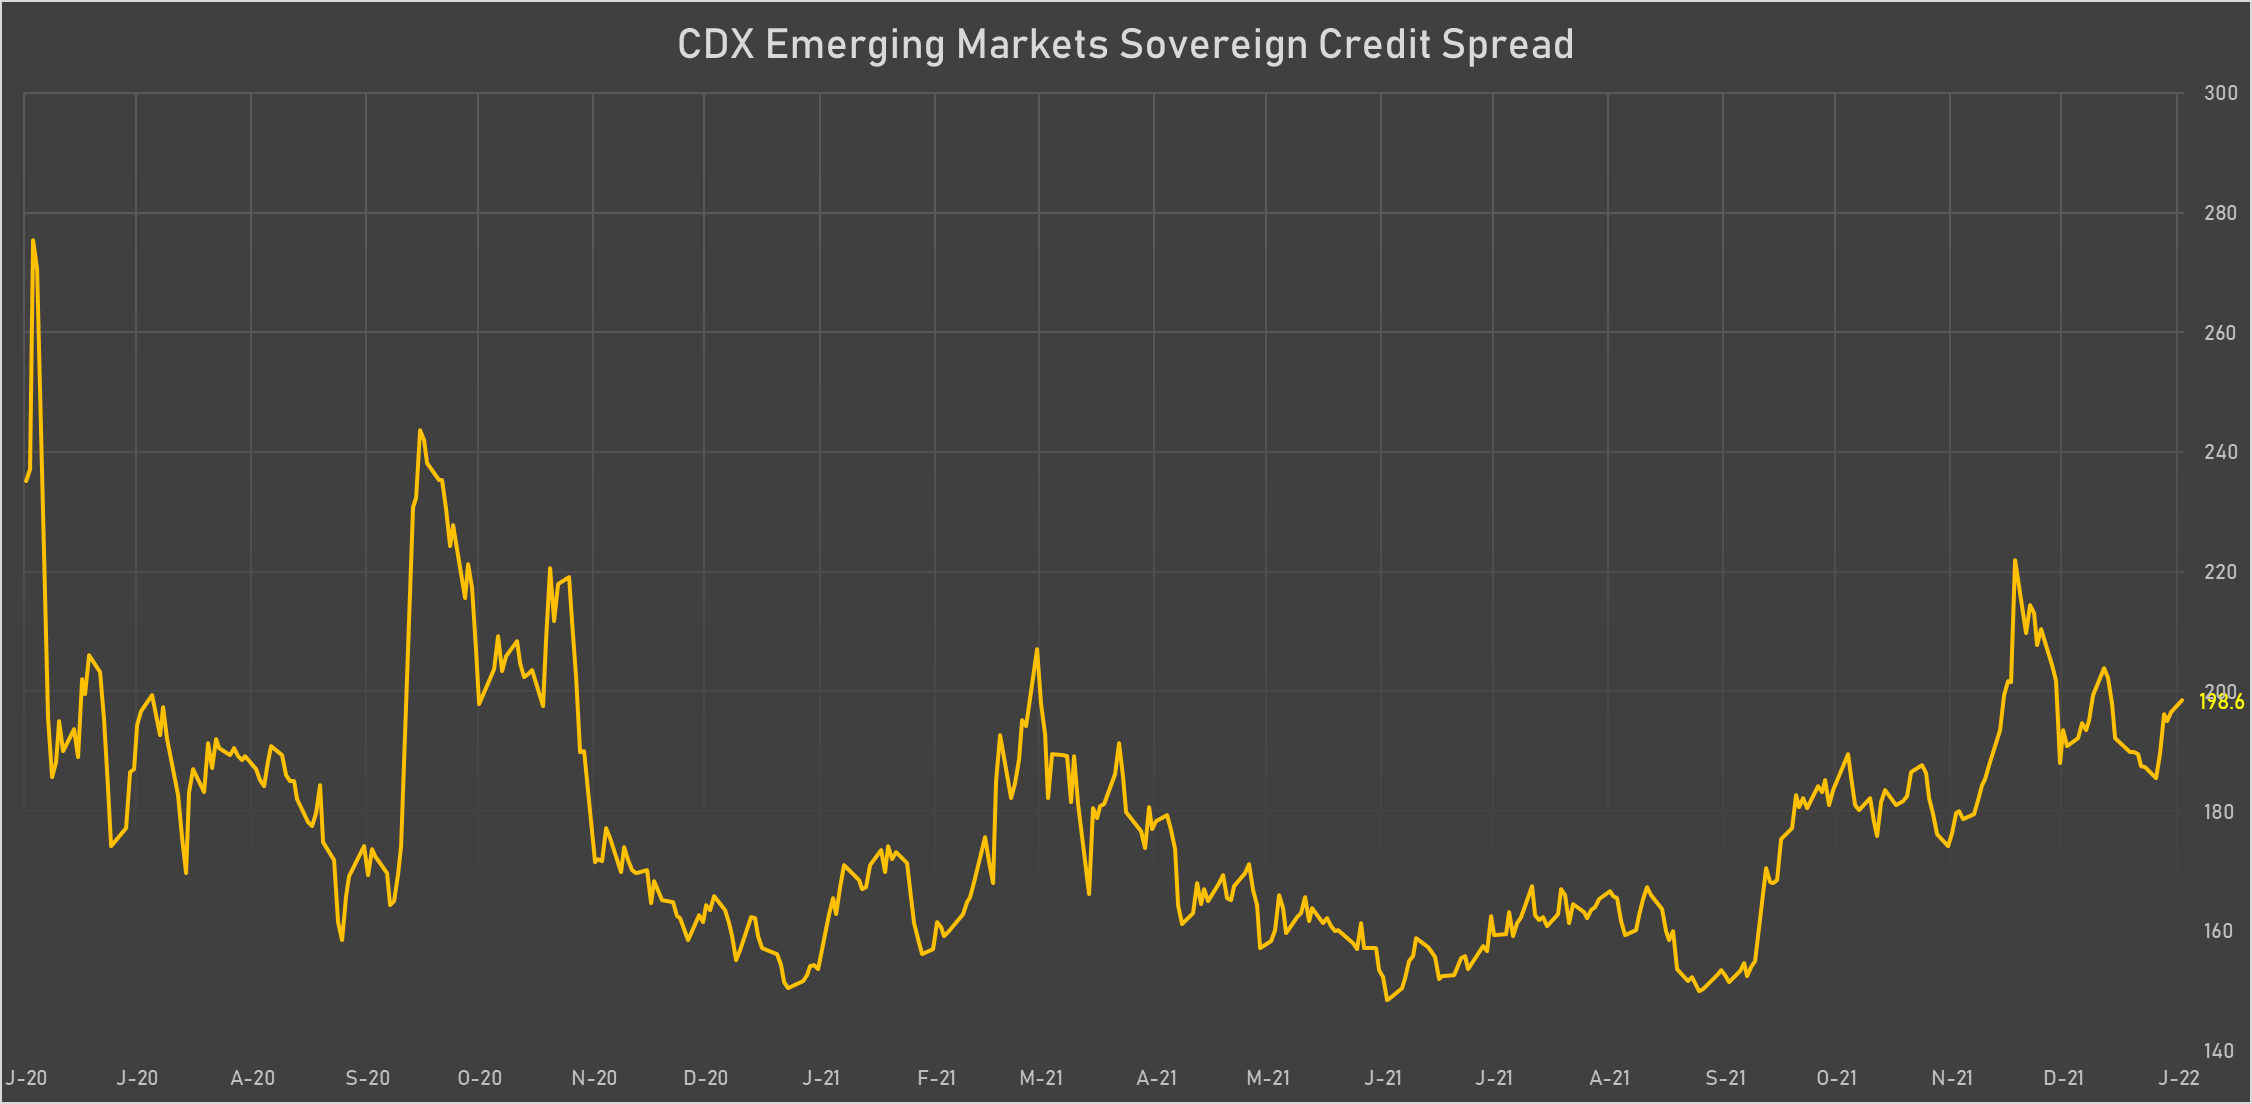 CDX Emerging Markets Sovereign Credit Spread | Sources: phipost.com, Refinitiv data